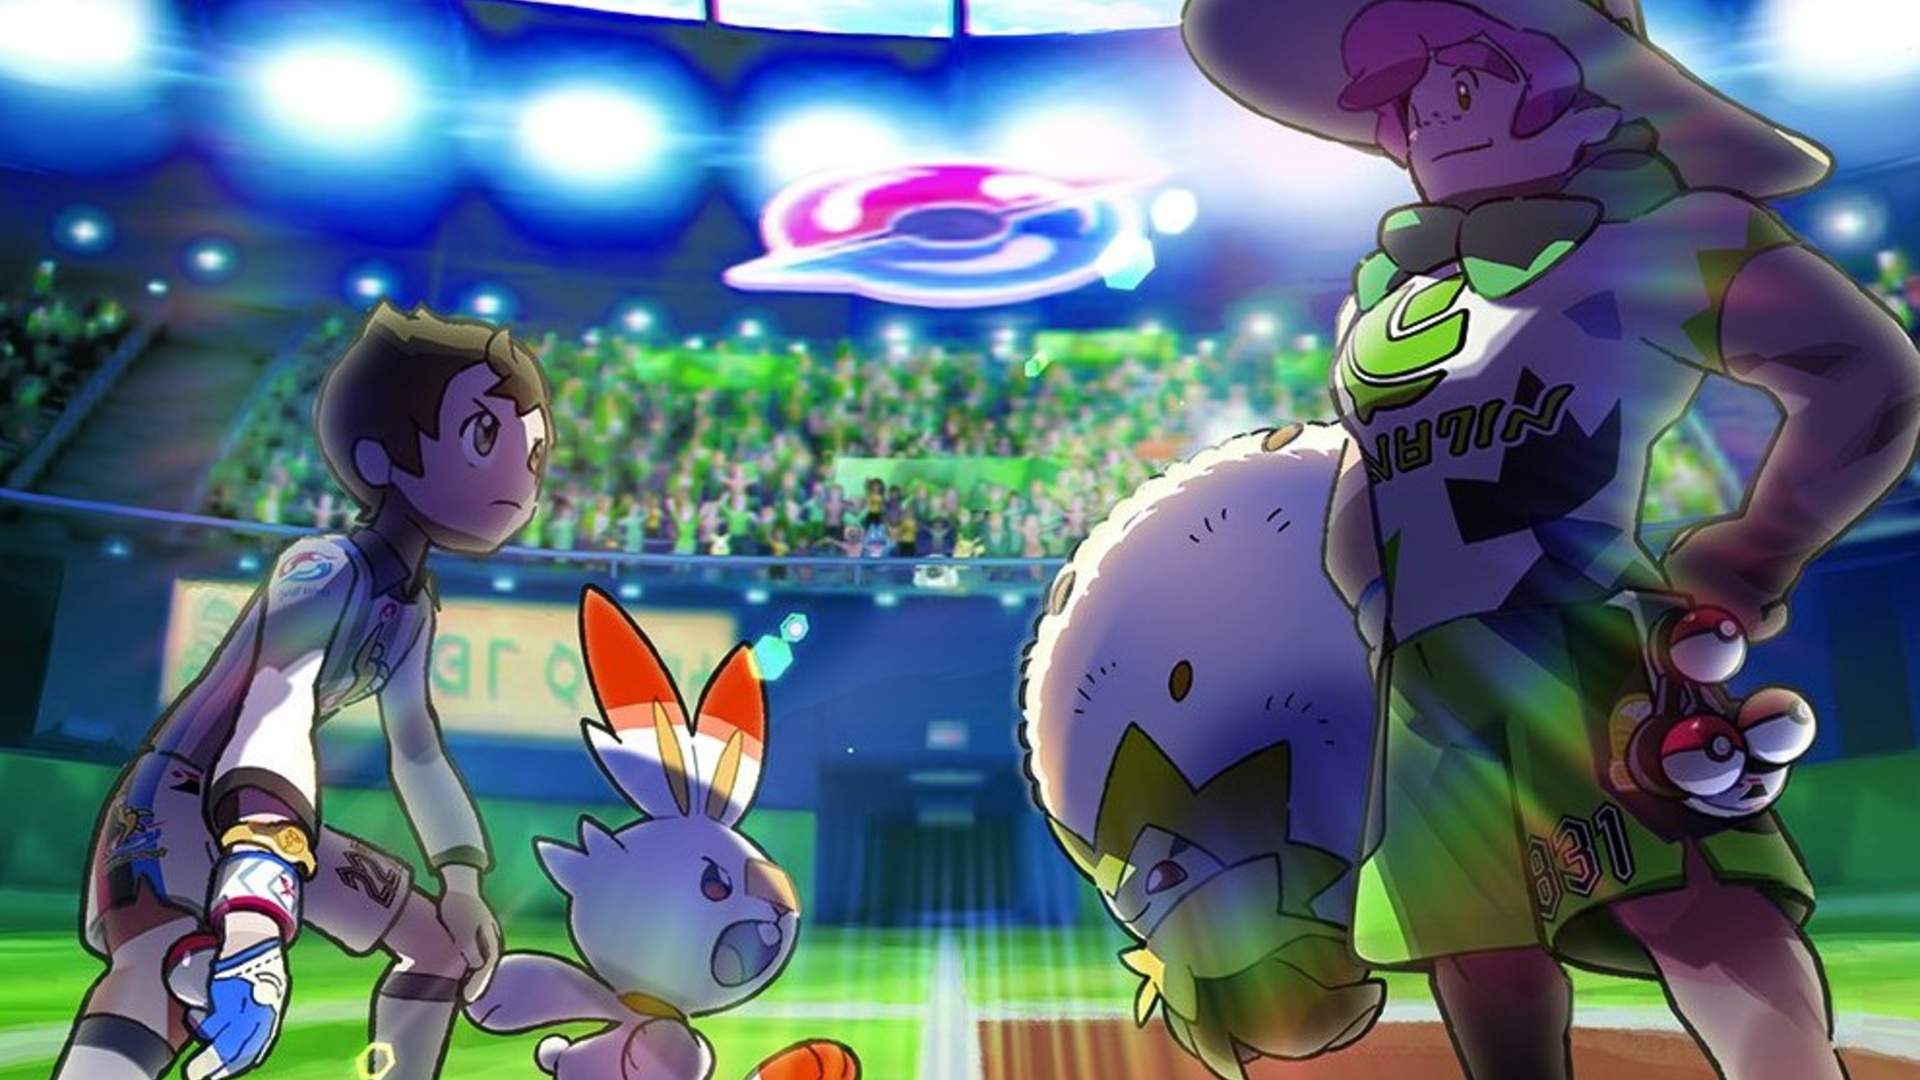 Pokemon Sword and Shield Version Exclusives: Exclusive Pokemon, Exclusive Gym Leaders Are the Differences Between Sword and Shield